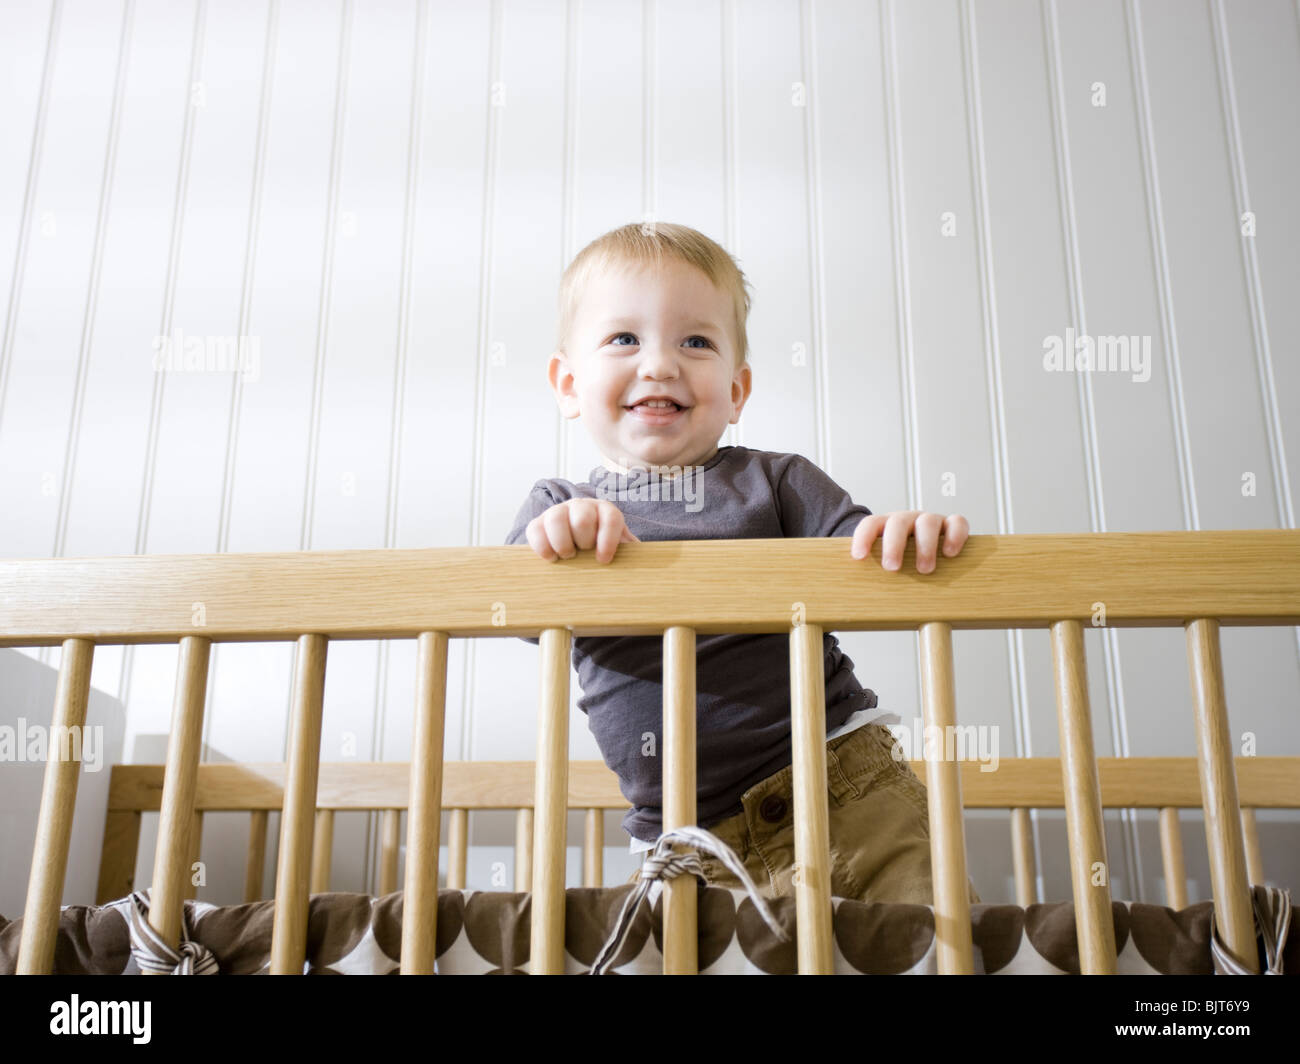 USA, Utah, Provo, Baby Boy (18-23 mois) standing in crib Banque D'Images